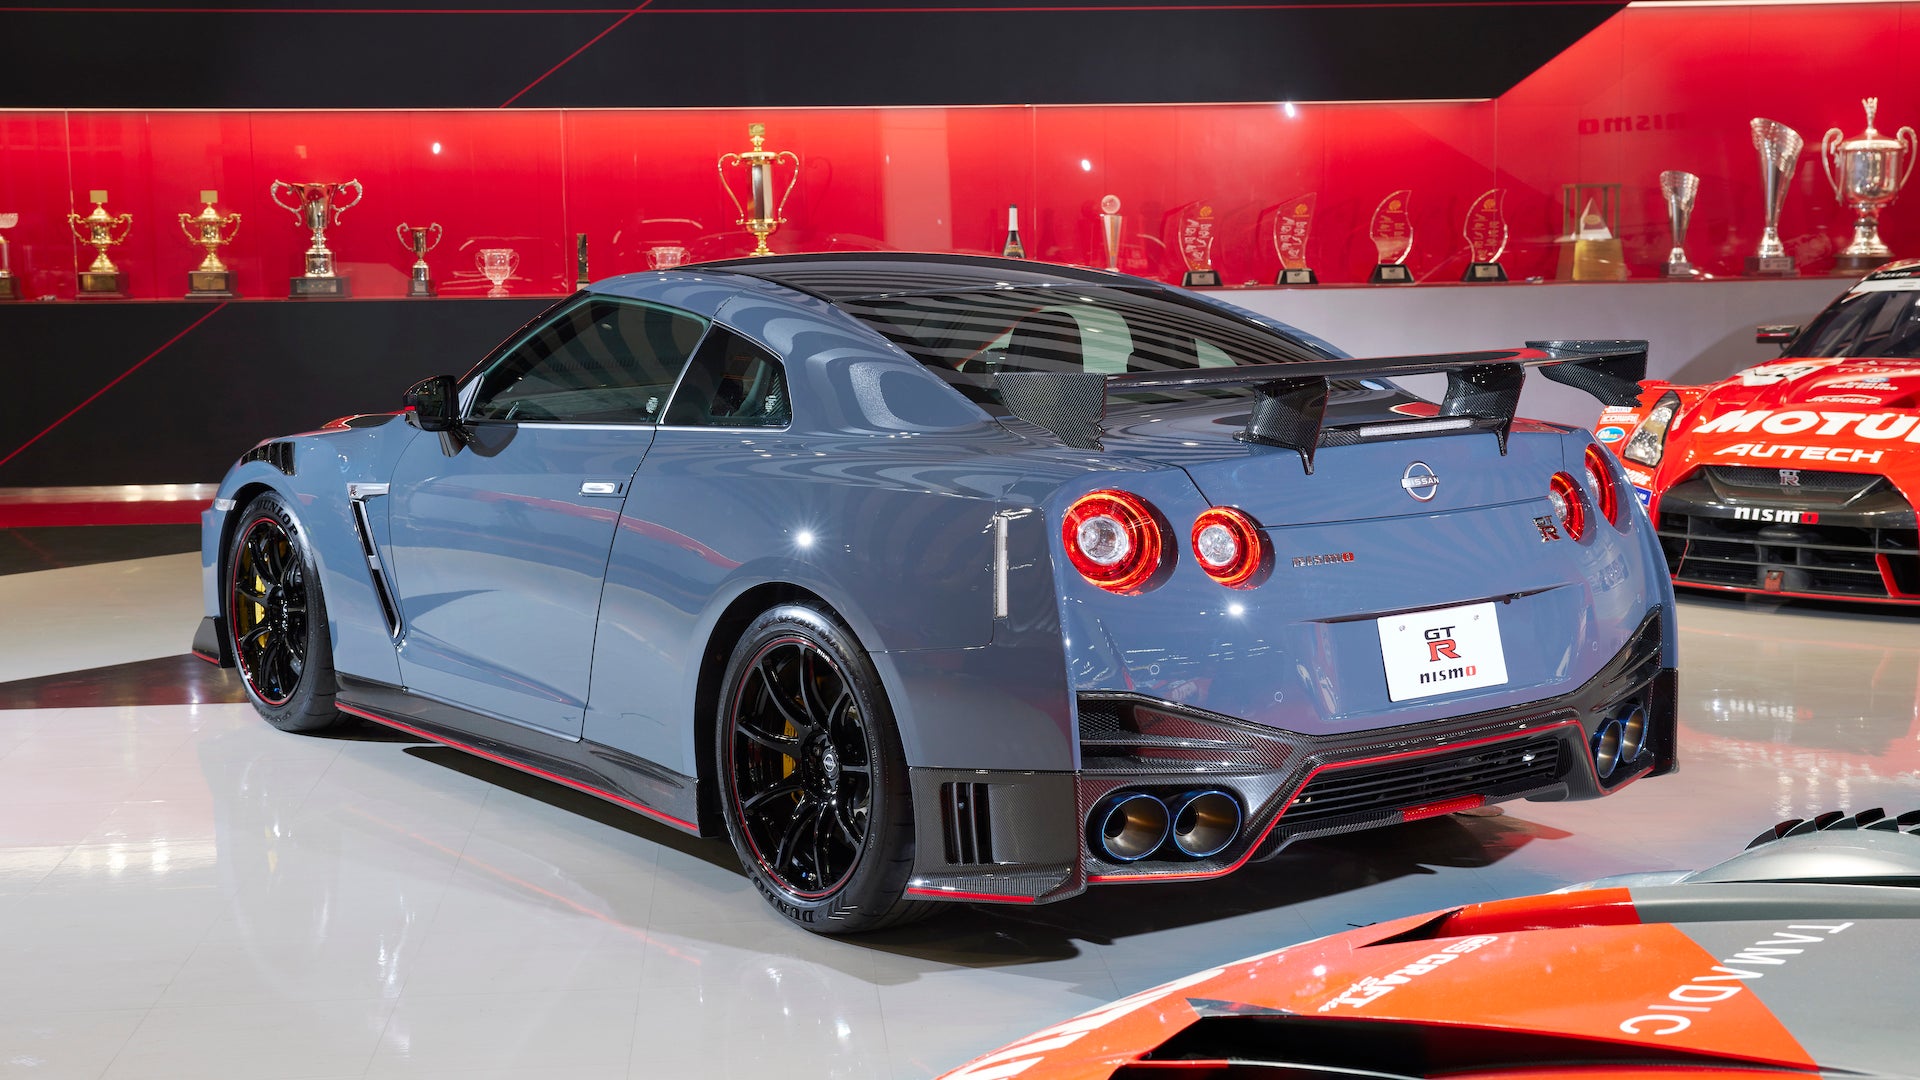 Nissan GT-R Nismo Special Edition: A Carbon Hood and Nissan's New Logo Sum Up Godzilla's Latest